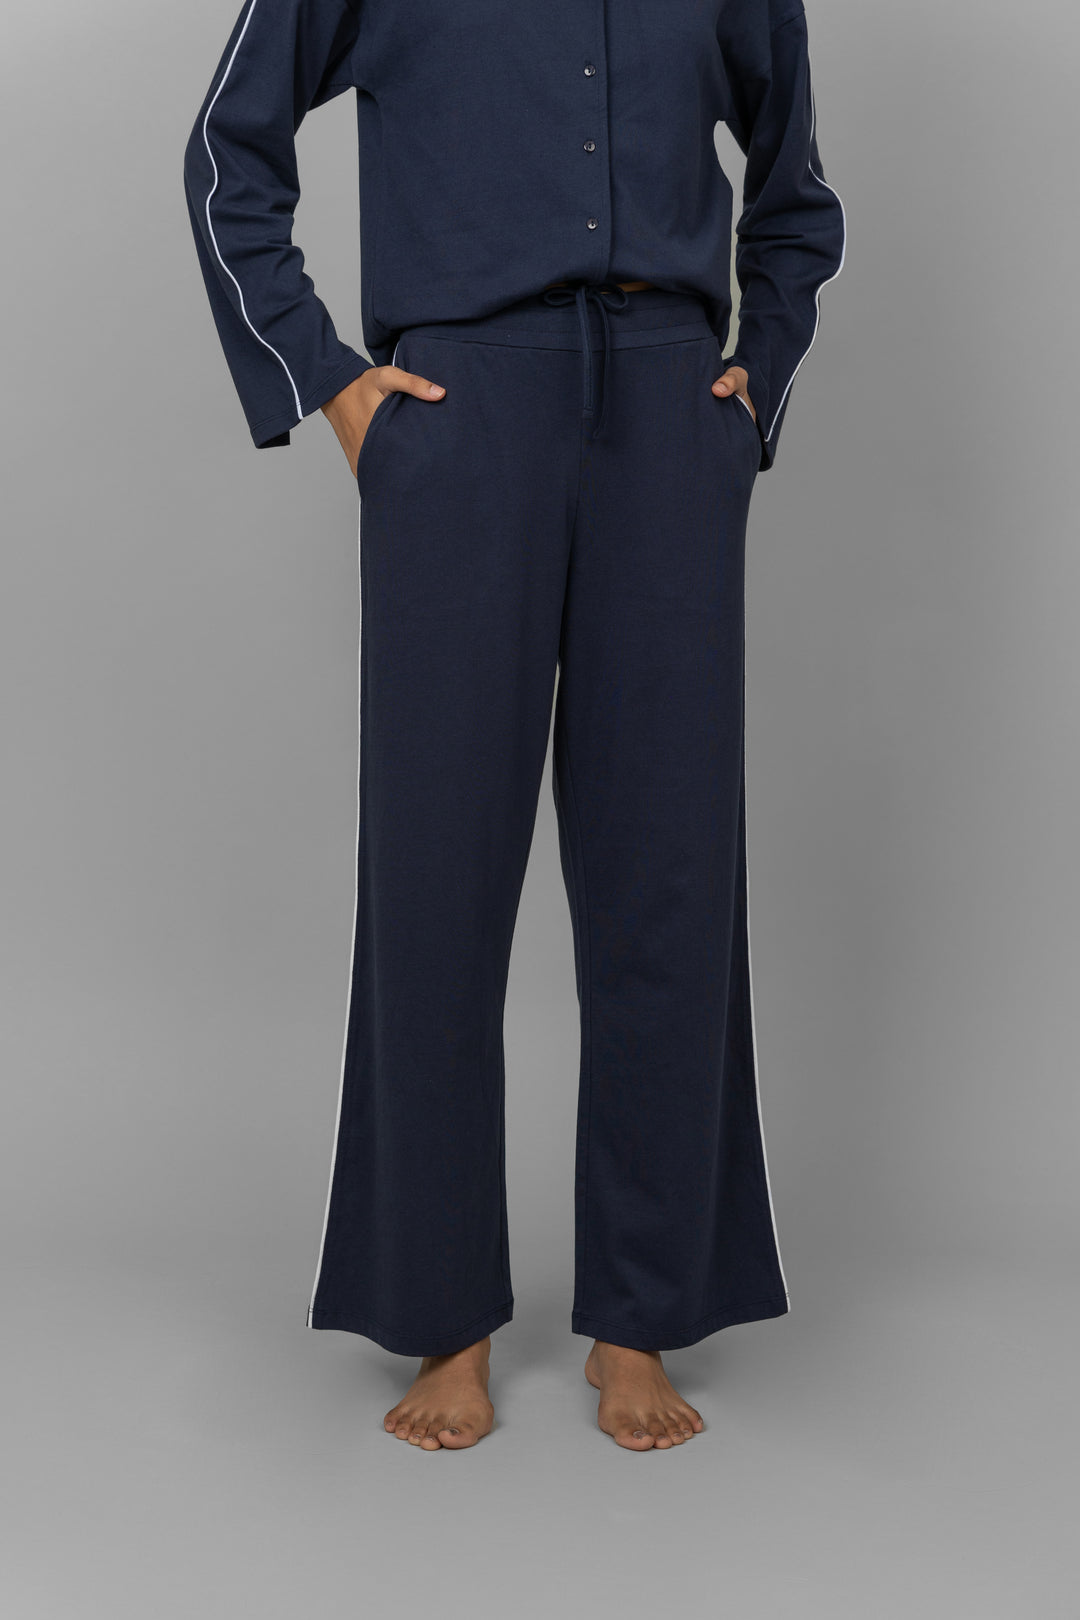 Navy Contrast Piping Pant